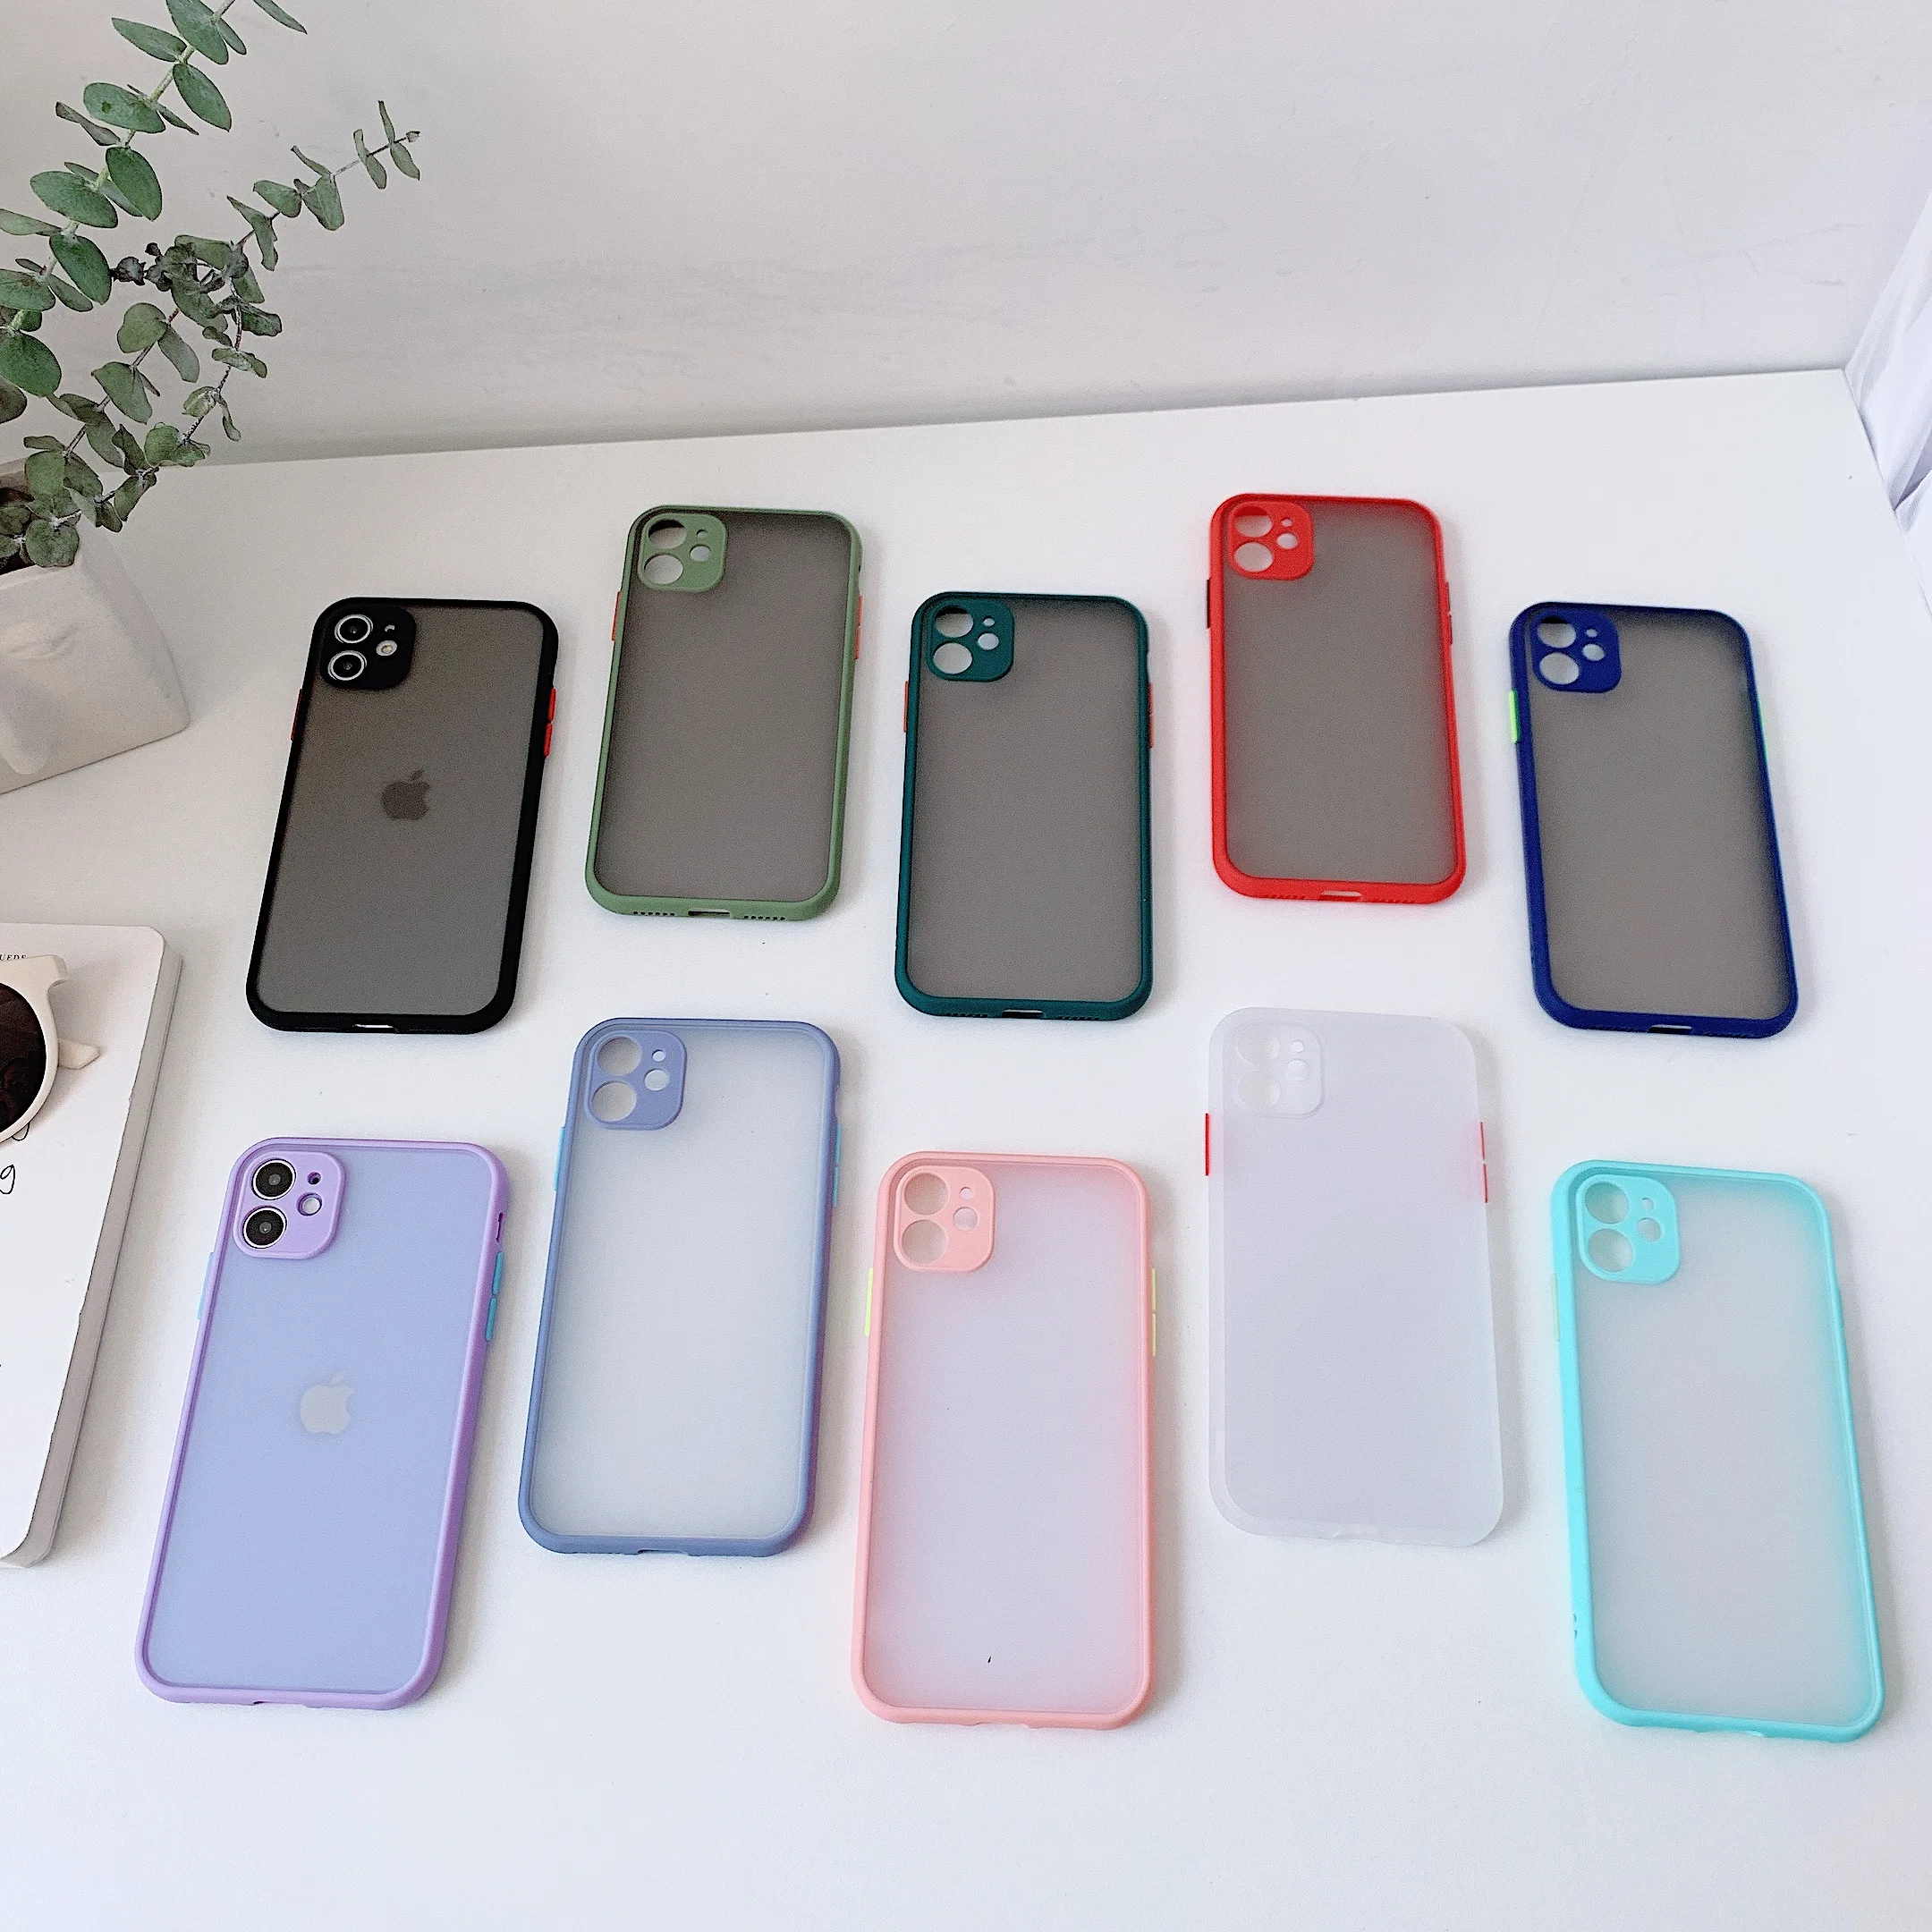 

Matte Smoke Skin PC Frosted Phone Cases For iPhone 12 Pro Max 6s 7 8 Plus XS Max XR SE 2020 Mobile Phone Cover Fundas Coque Capa